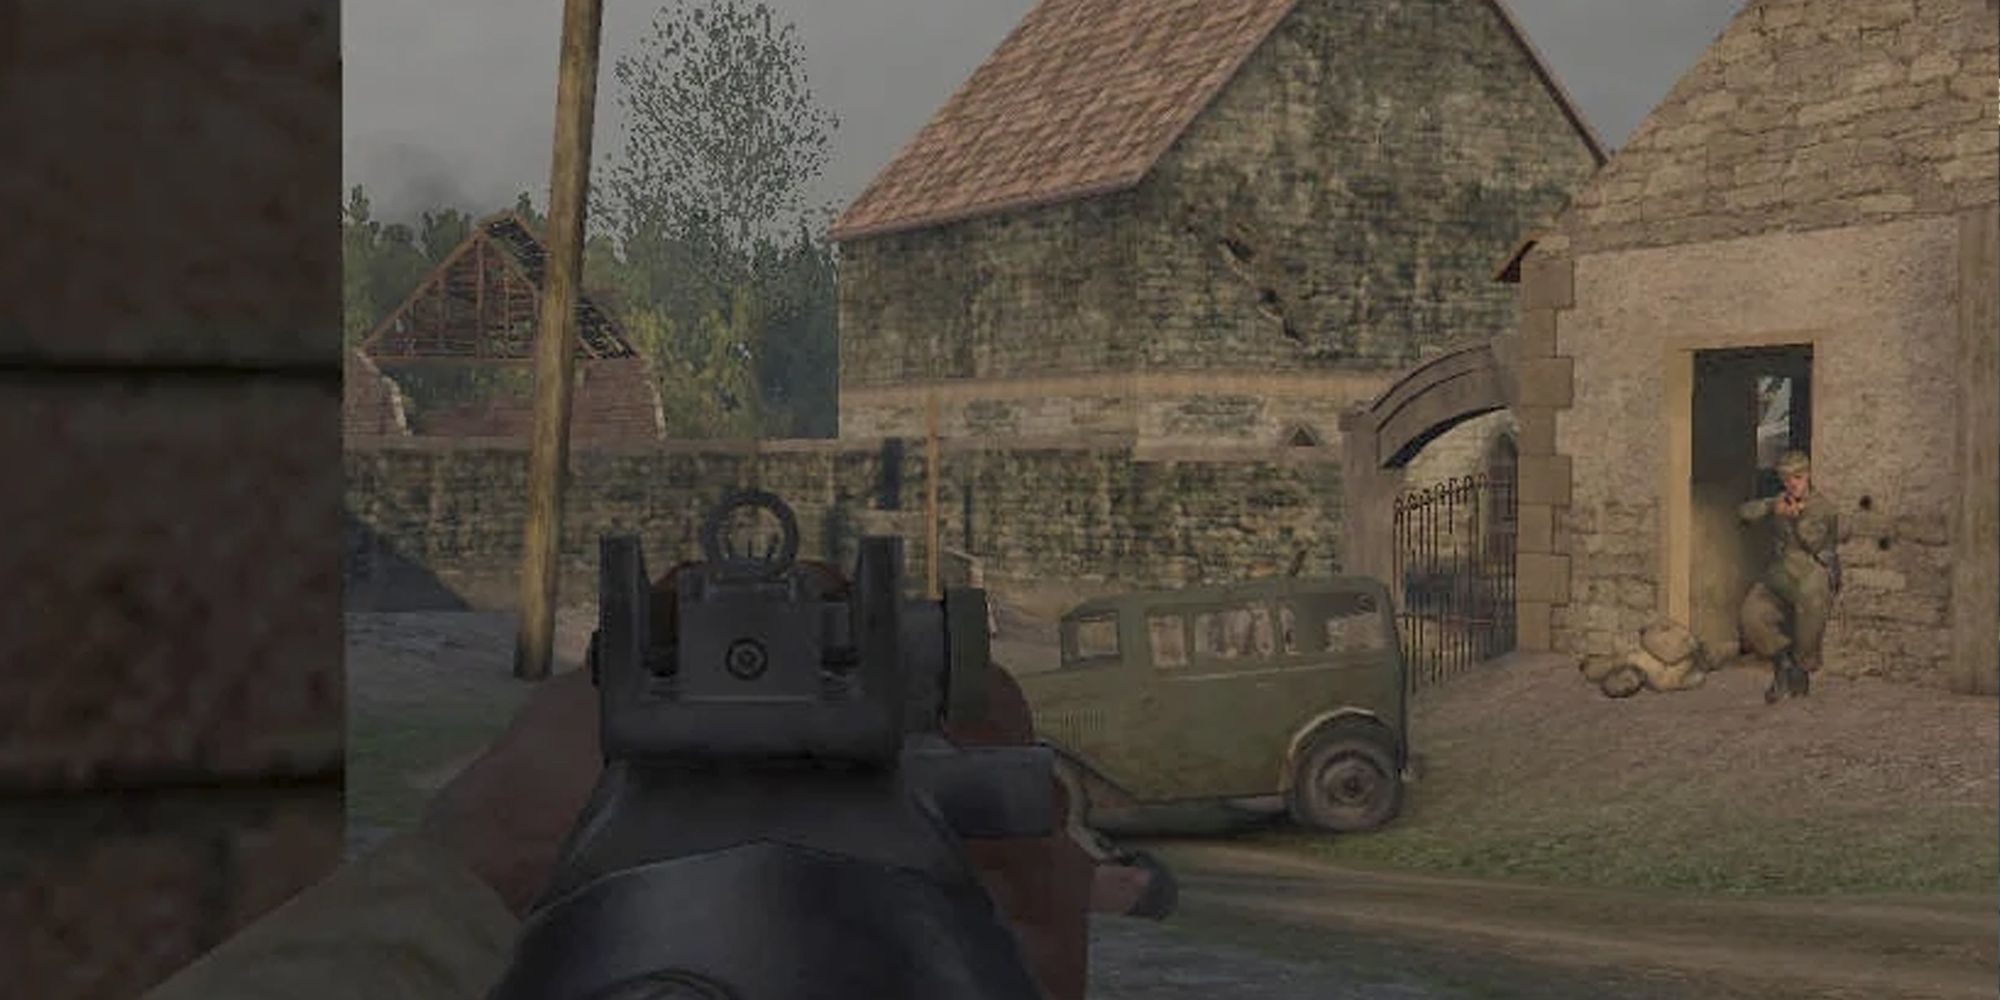 Call of Duty soldier pointing a gun at a wall in first-person as a soldier comes out a house to the right with their gun raised